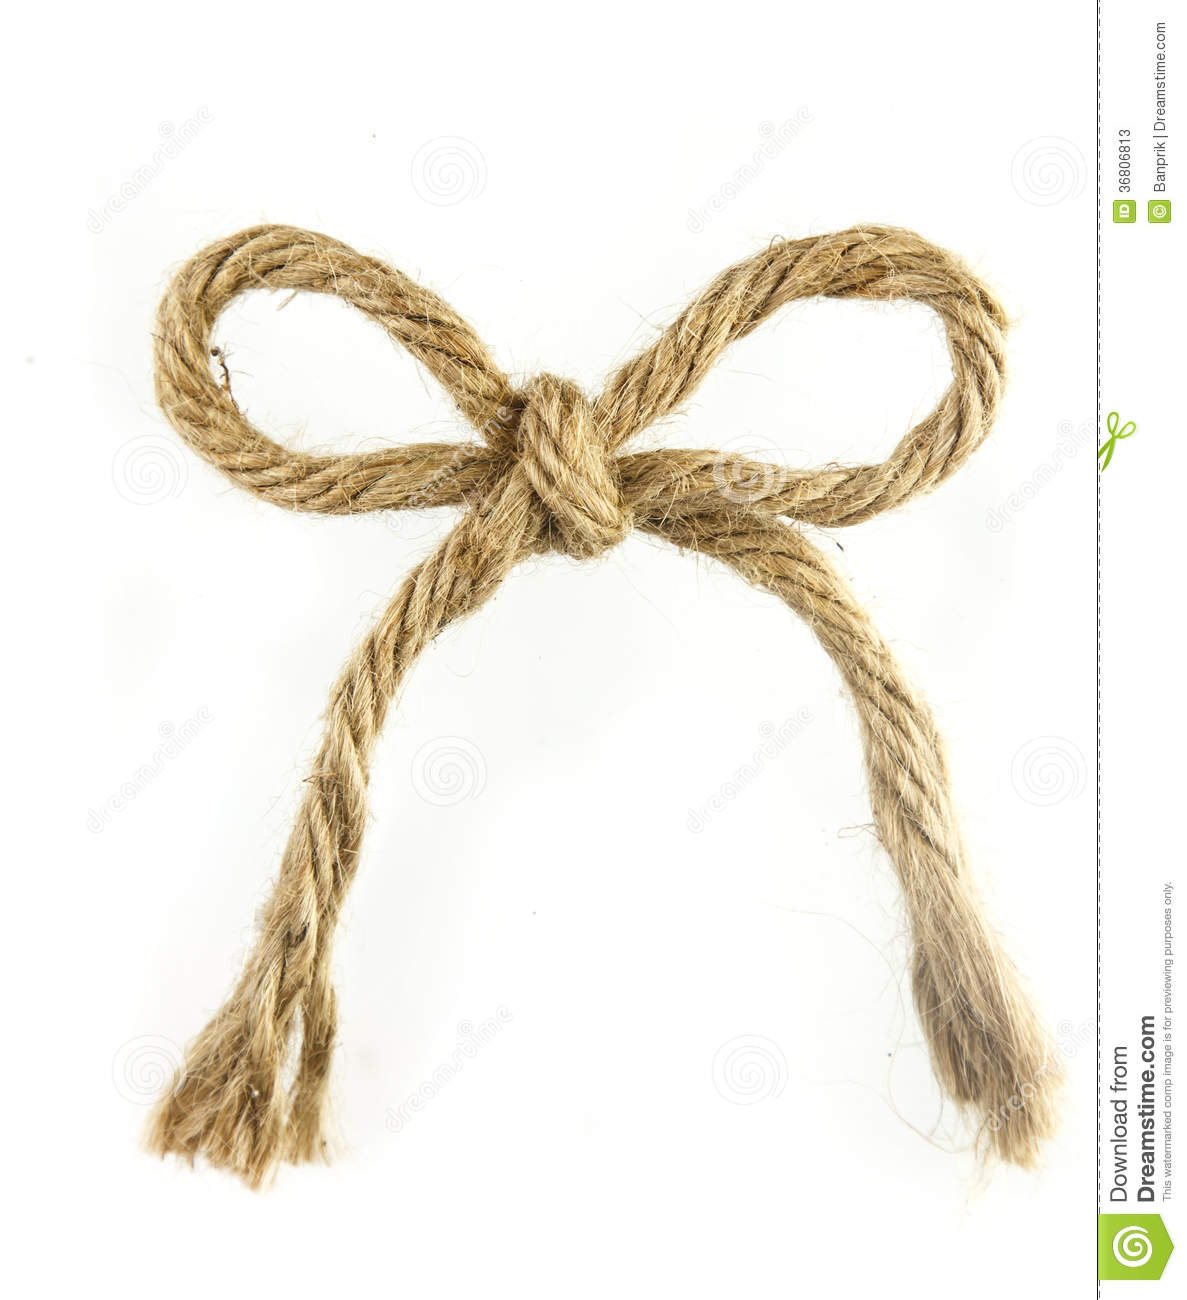 Brown Beautiful Rope Bow Isolated On White Stock Photos   Image    